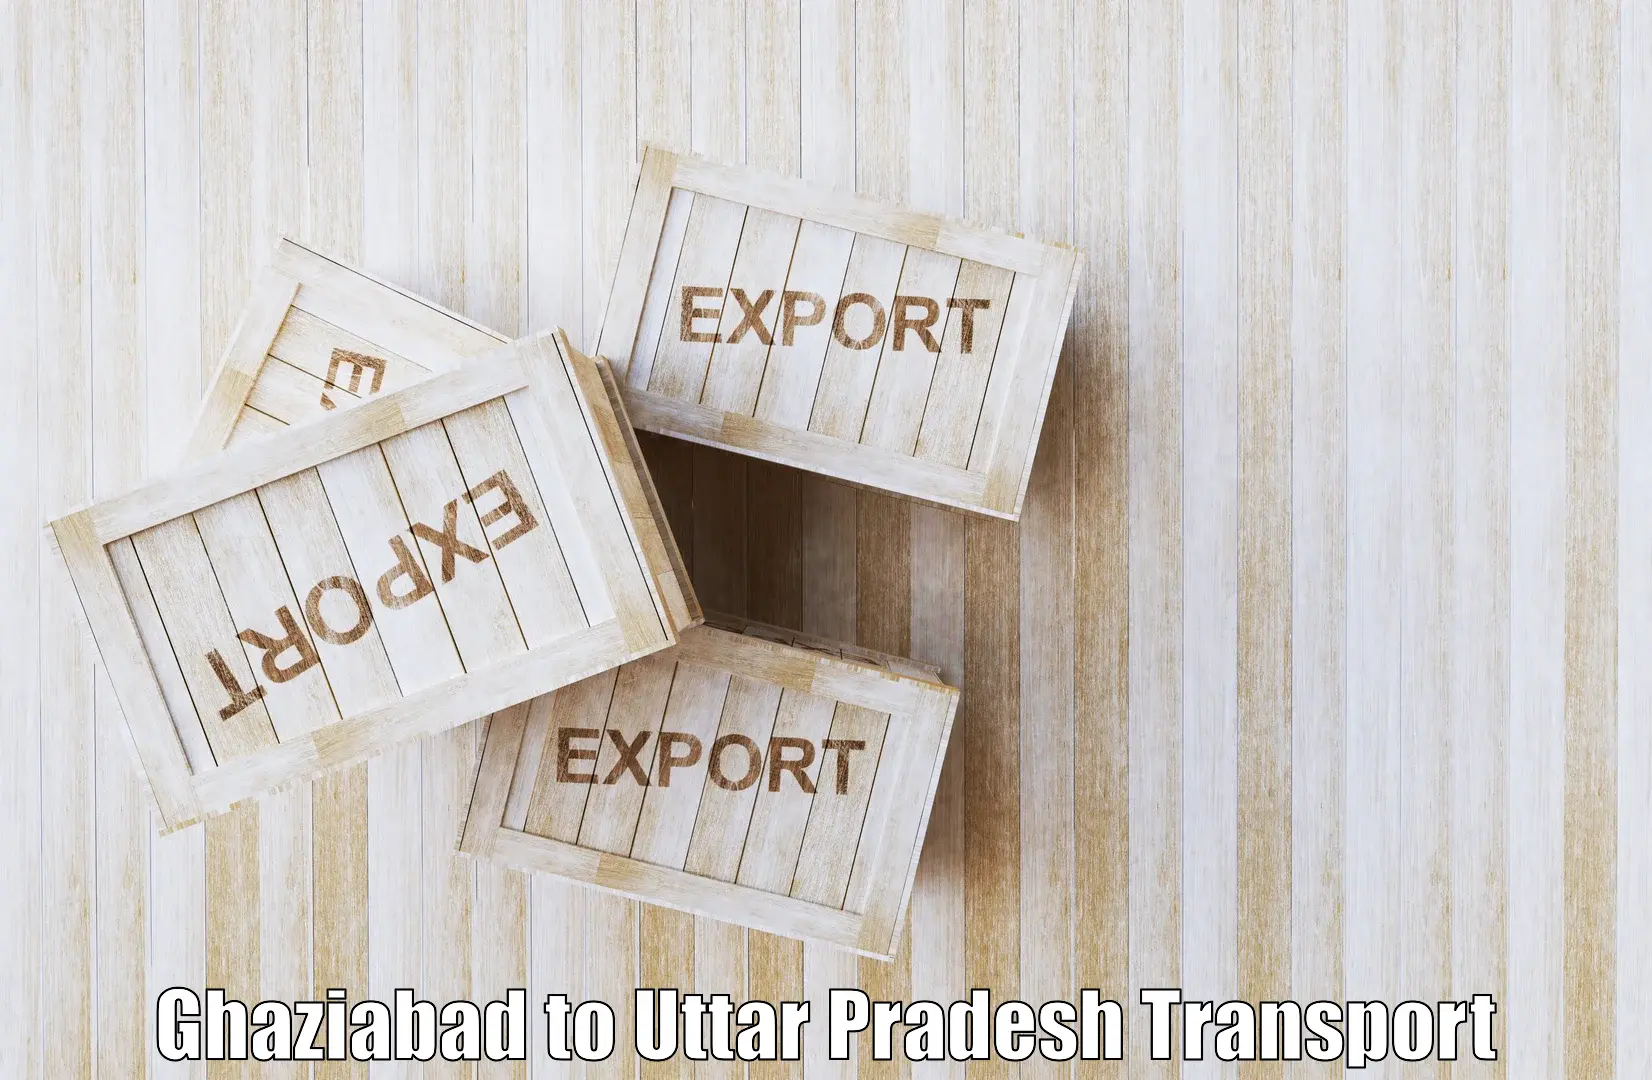 Parcel transport services Ghaziabad to Noida